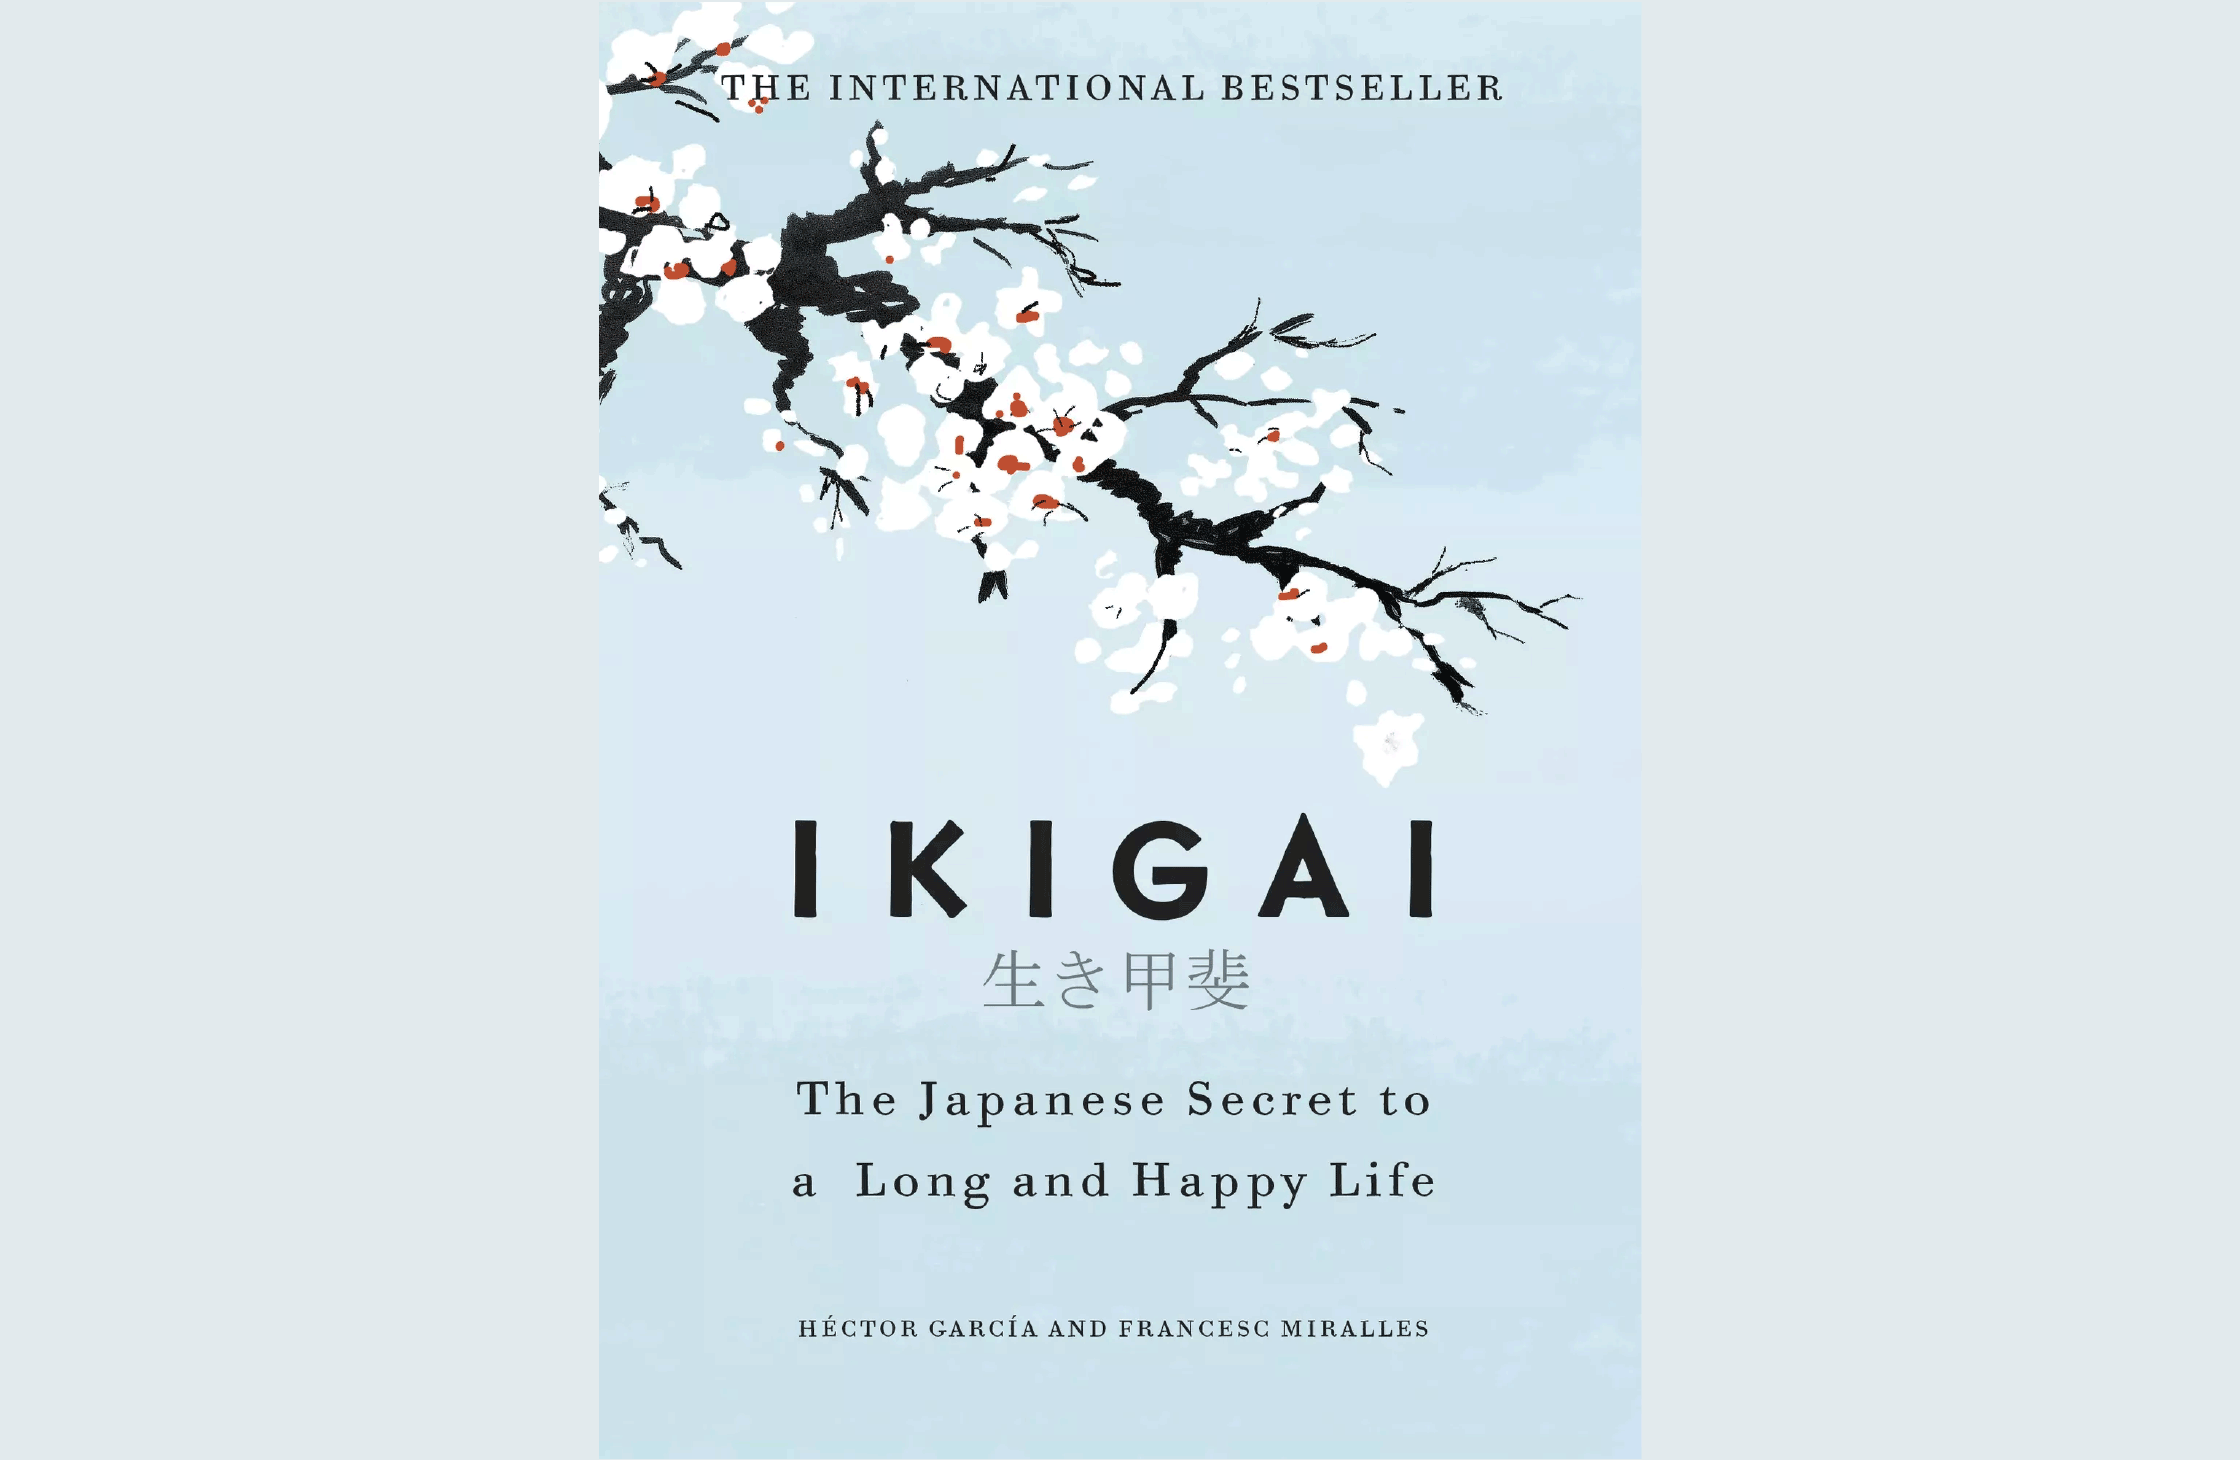 Summary: Ikigai: The Japanese Secret to a Long and Happy Life: Hector Garcia